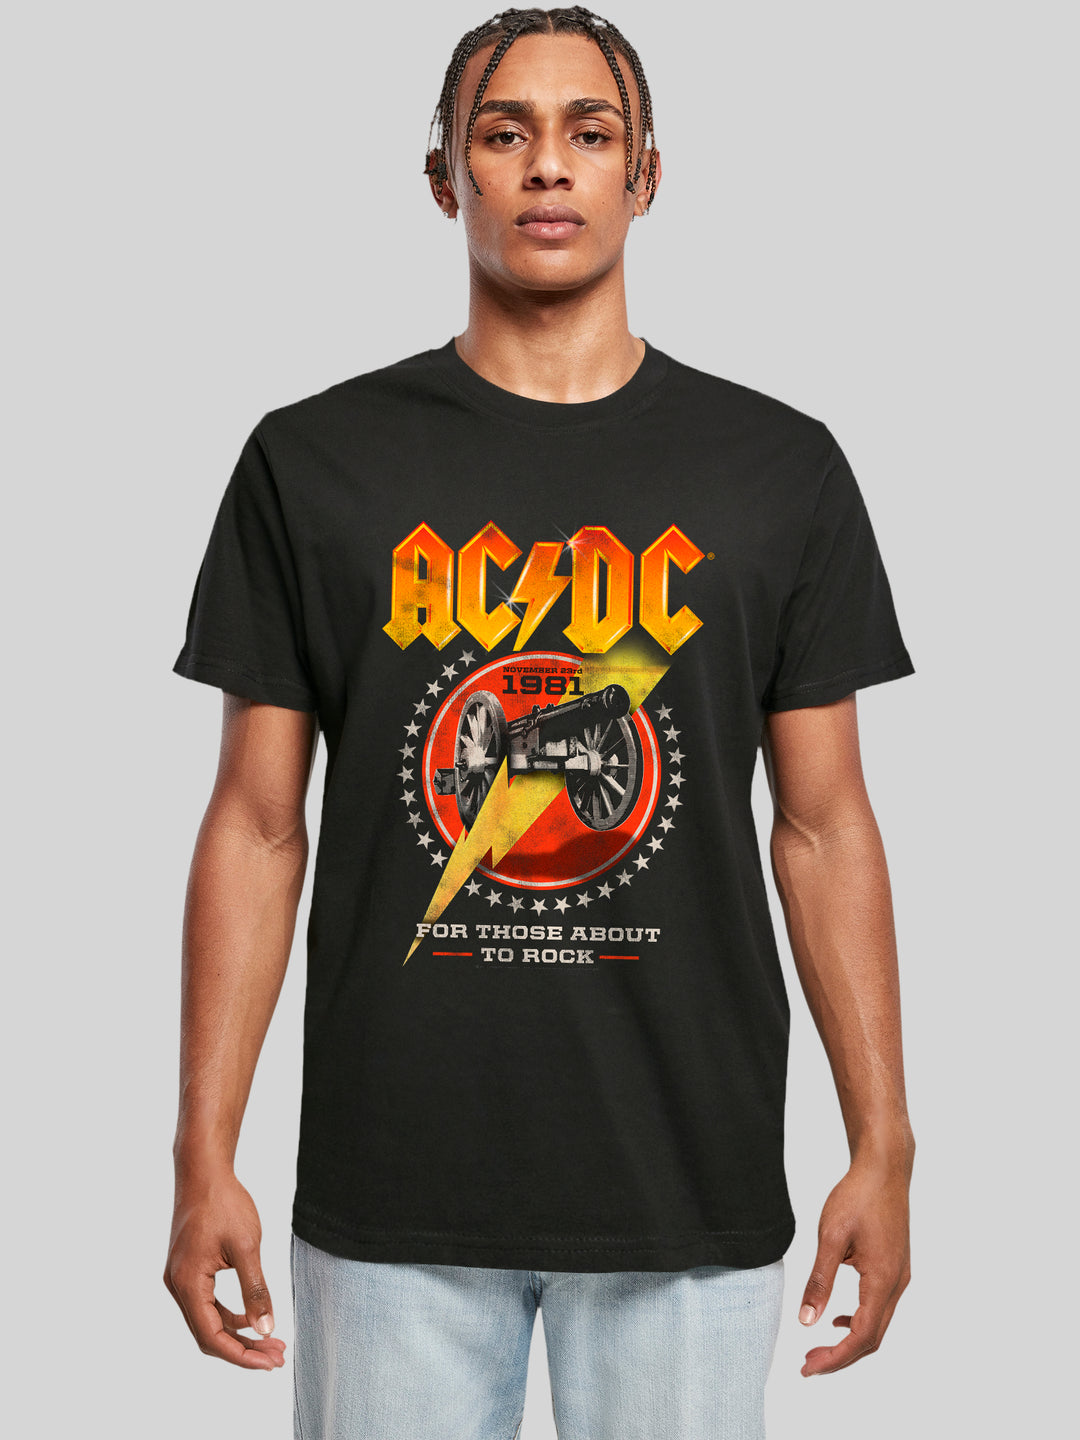 AC/DC "For Those About To Rock 1981" Round Neck T-Shirt – Express Your Rock 'n' Roll Soul with Style